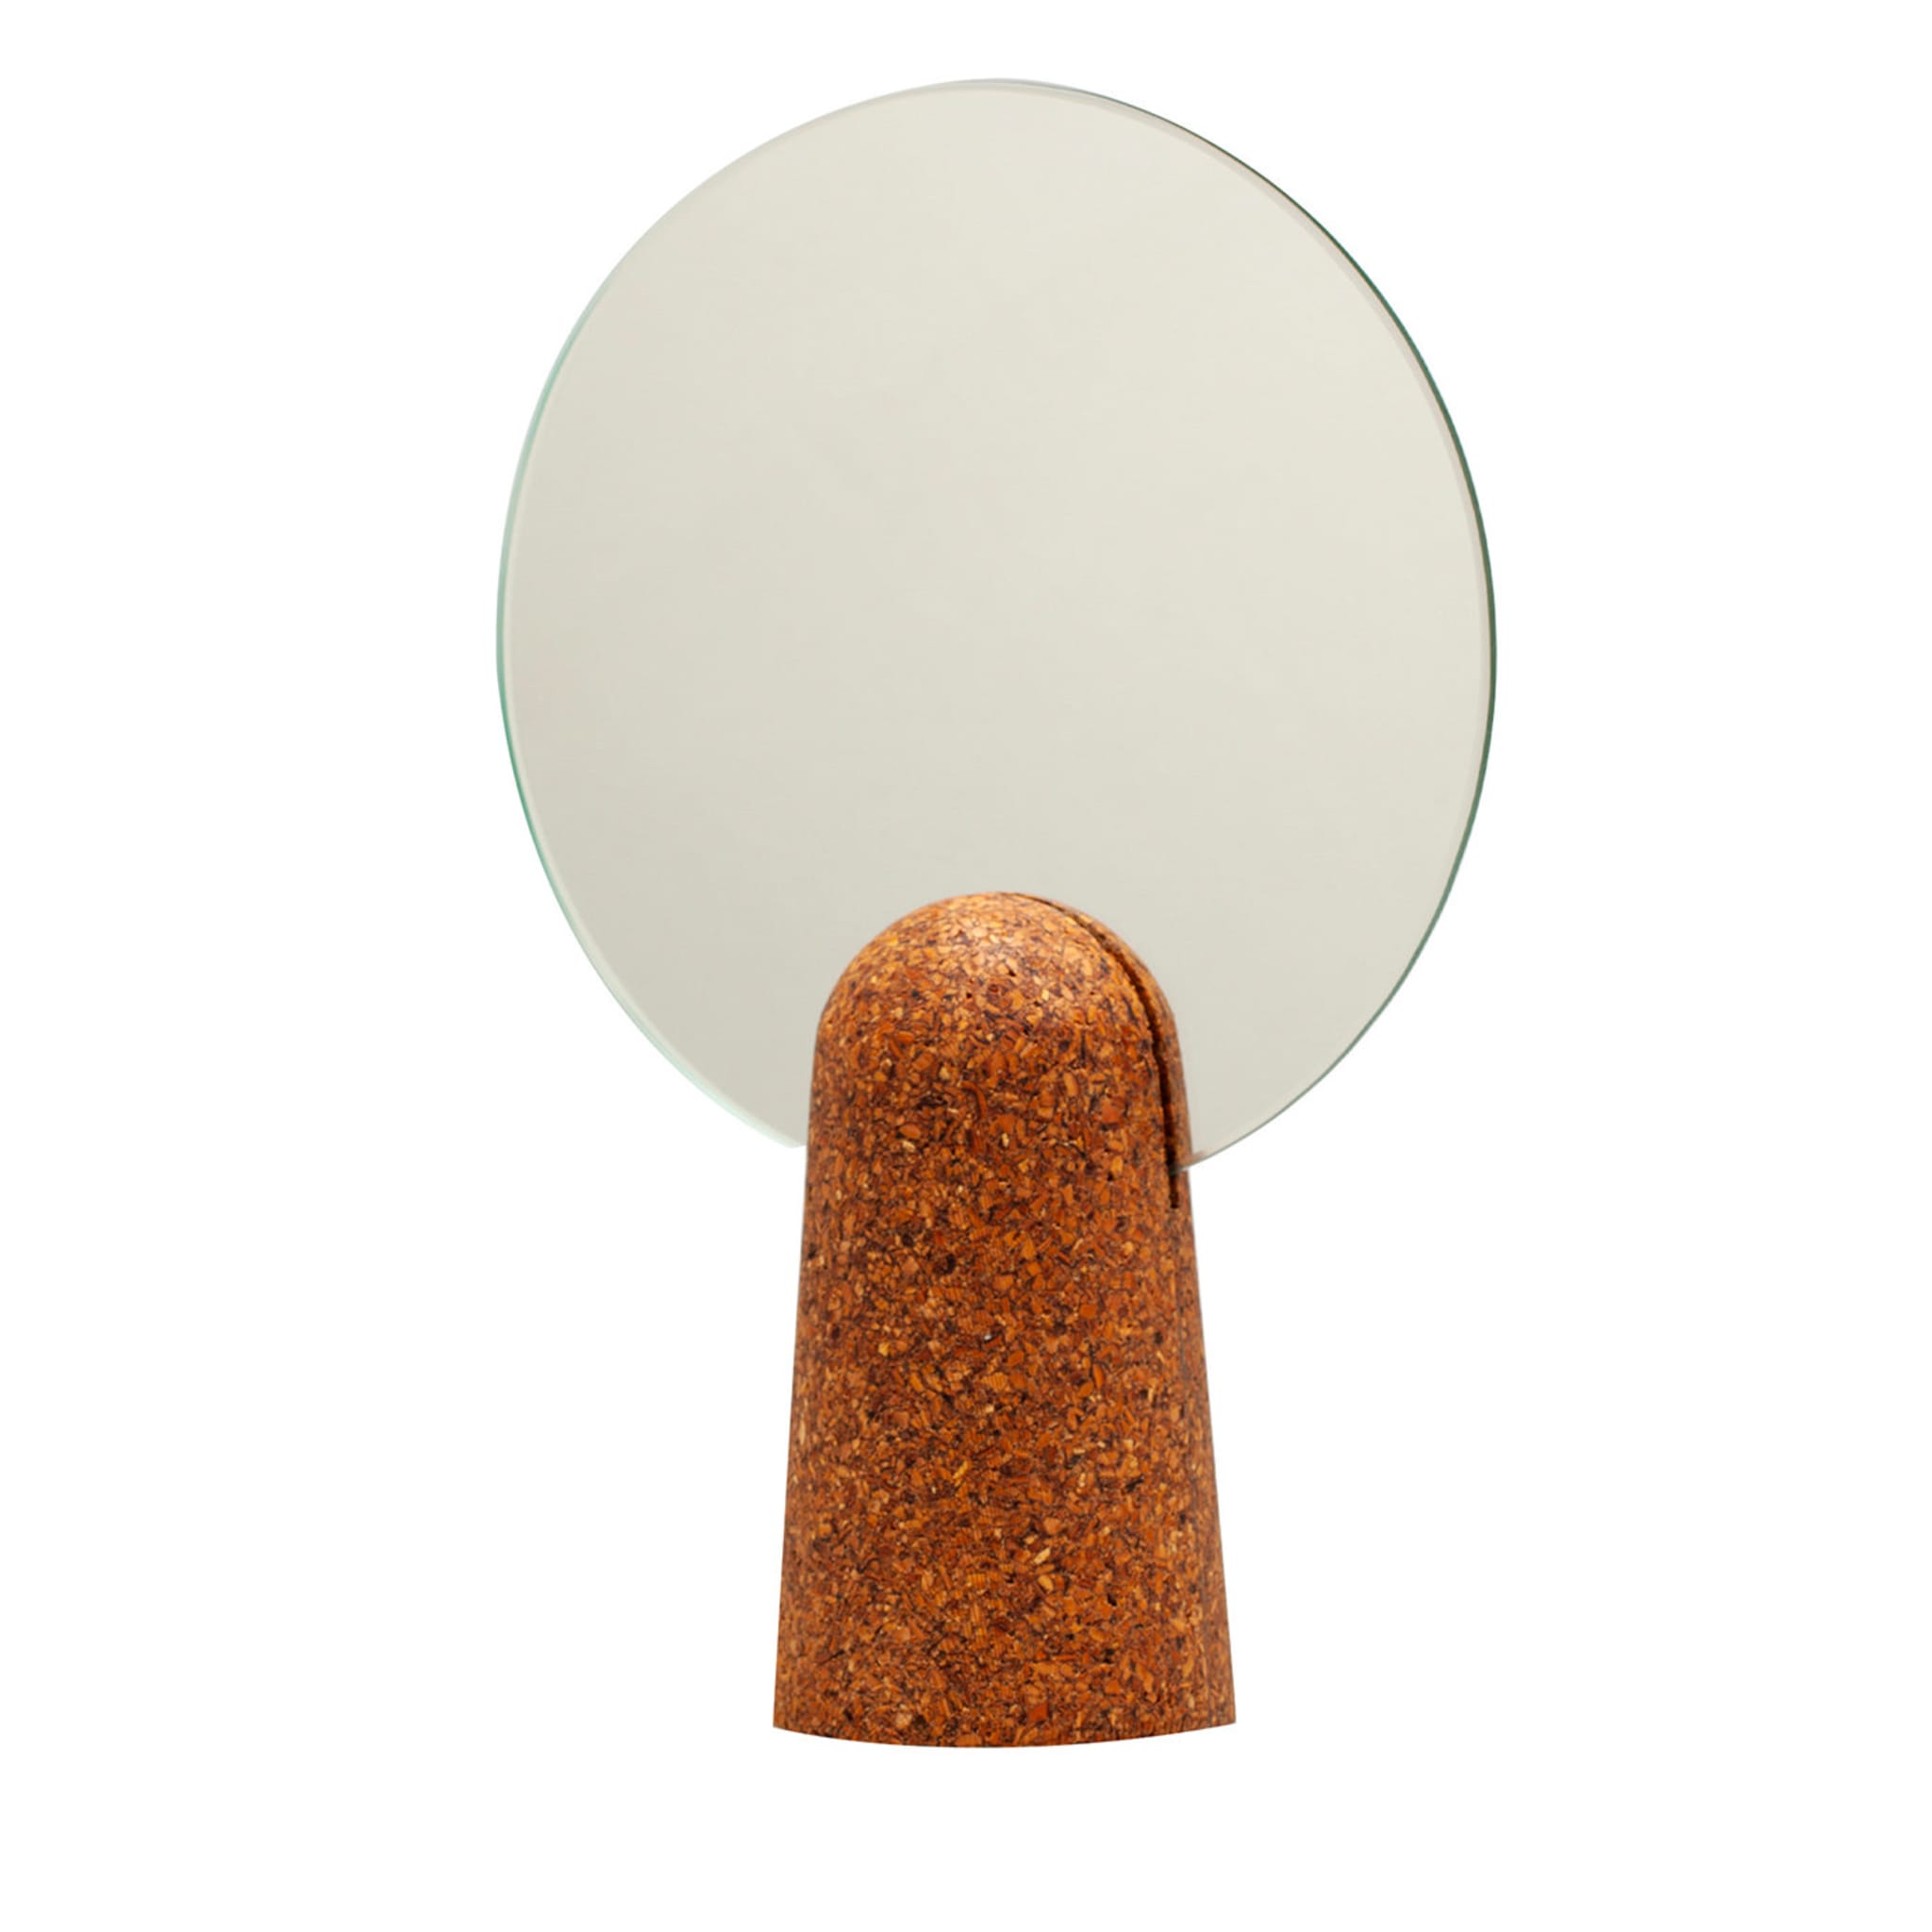 Almond Table Mirror by Dudesign - Main view